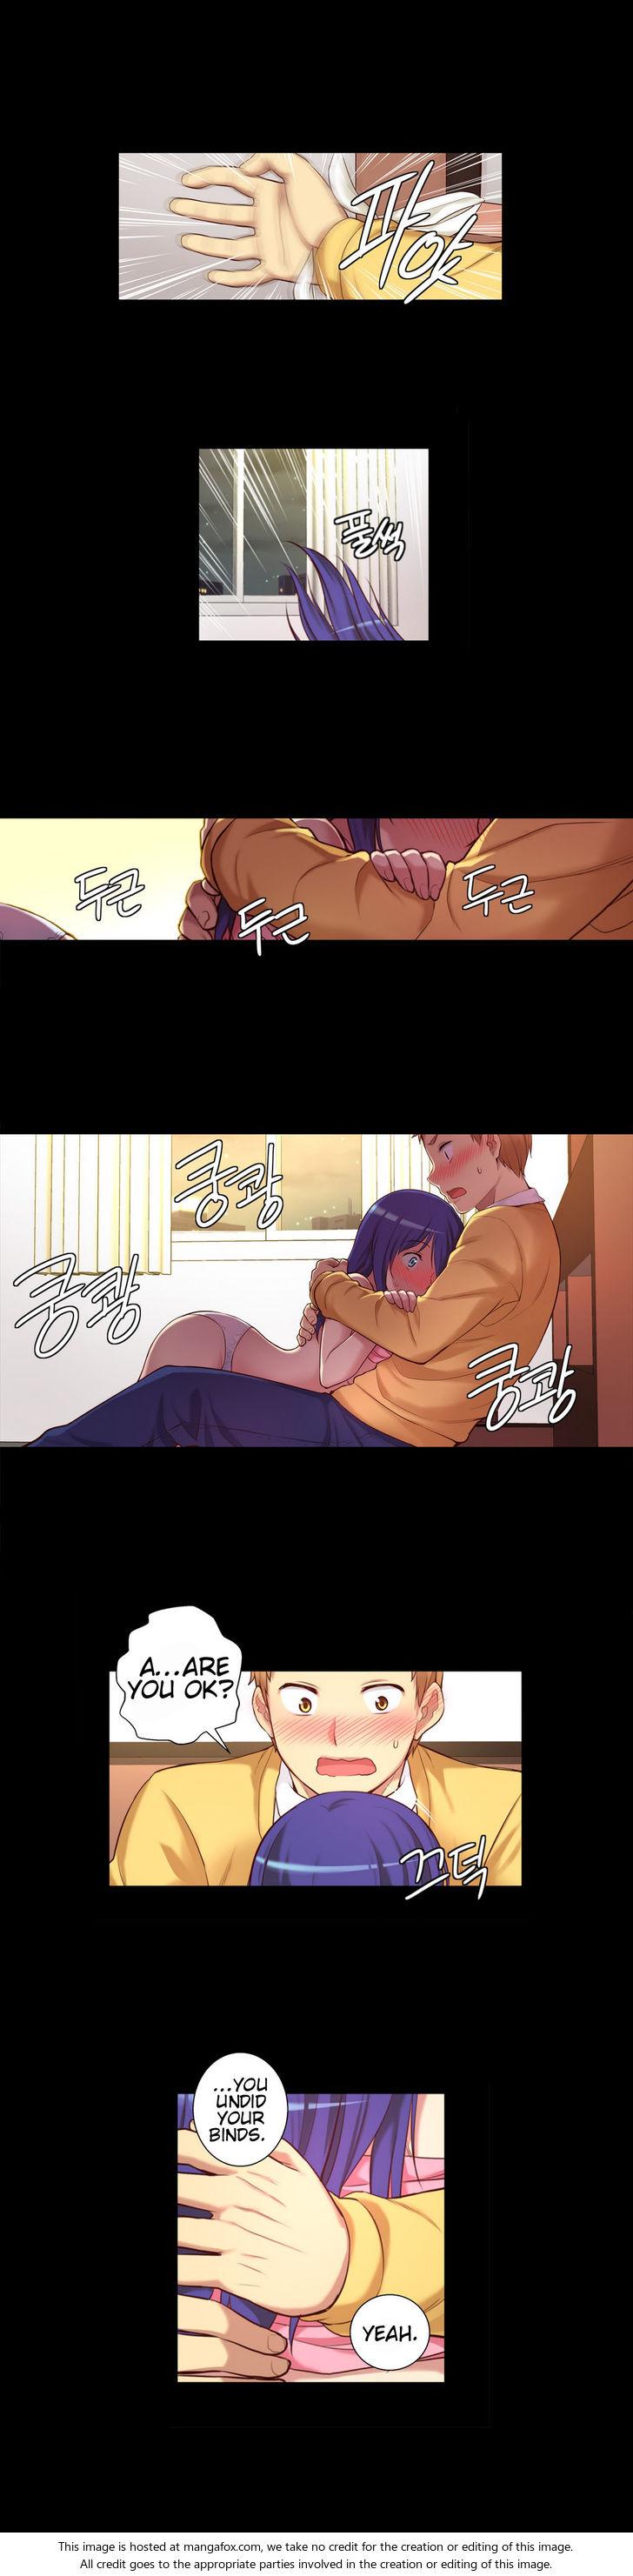 [Donggul Gom] She is Young (English) Part 1/2 152